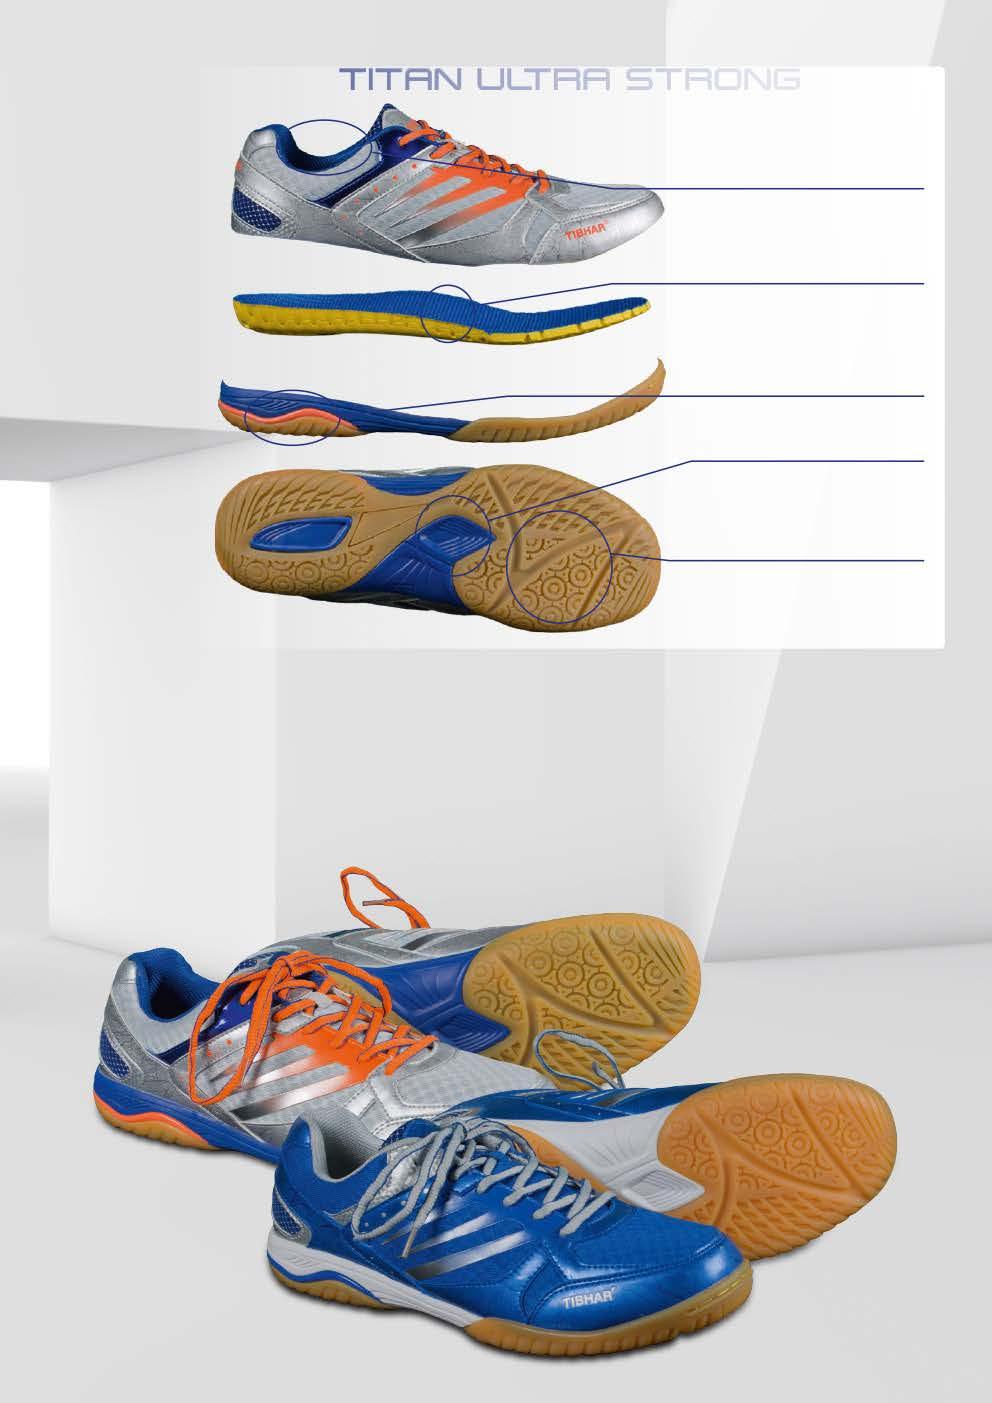 Soft-Skin microfibre for a pleasant wear Comfortable thermoactive insole with air canals The energy converter absorbs the movement vibrations Phylon made from two components for optimal ankle relief